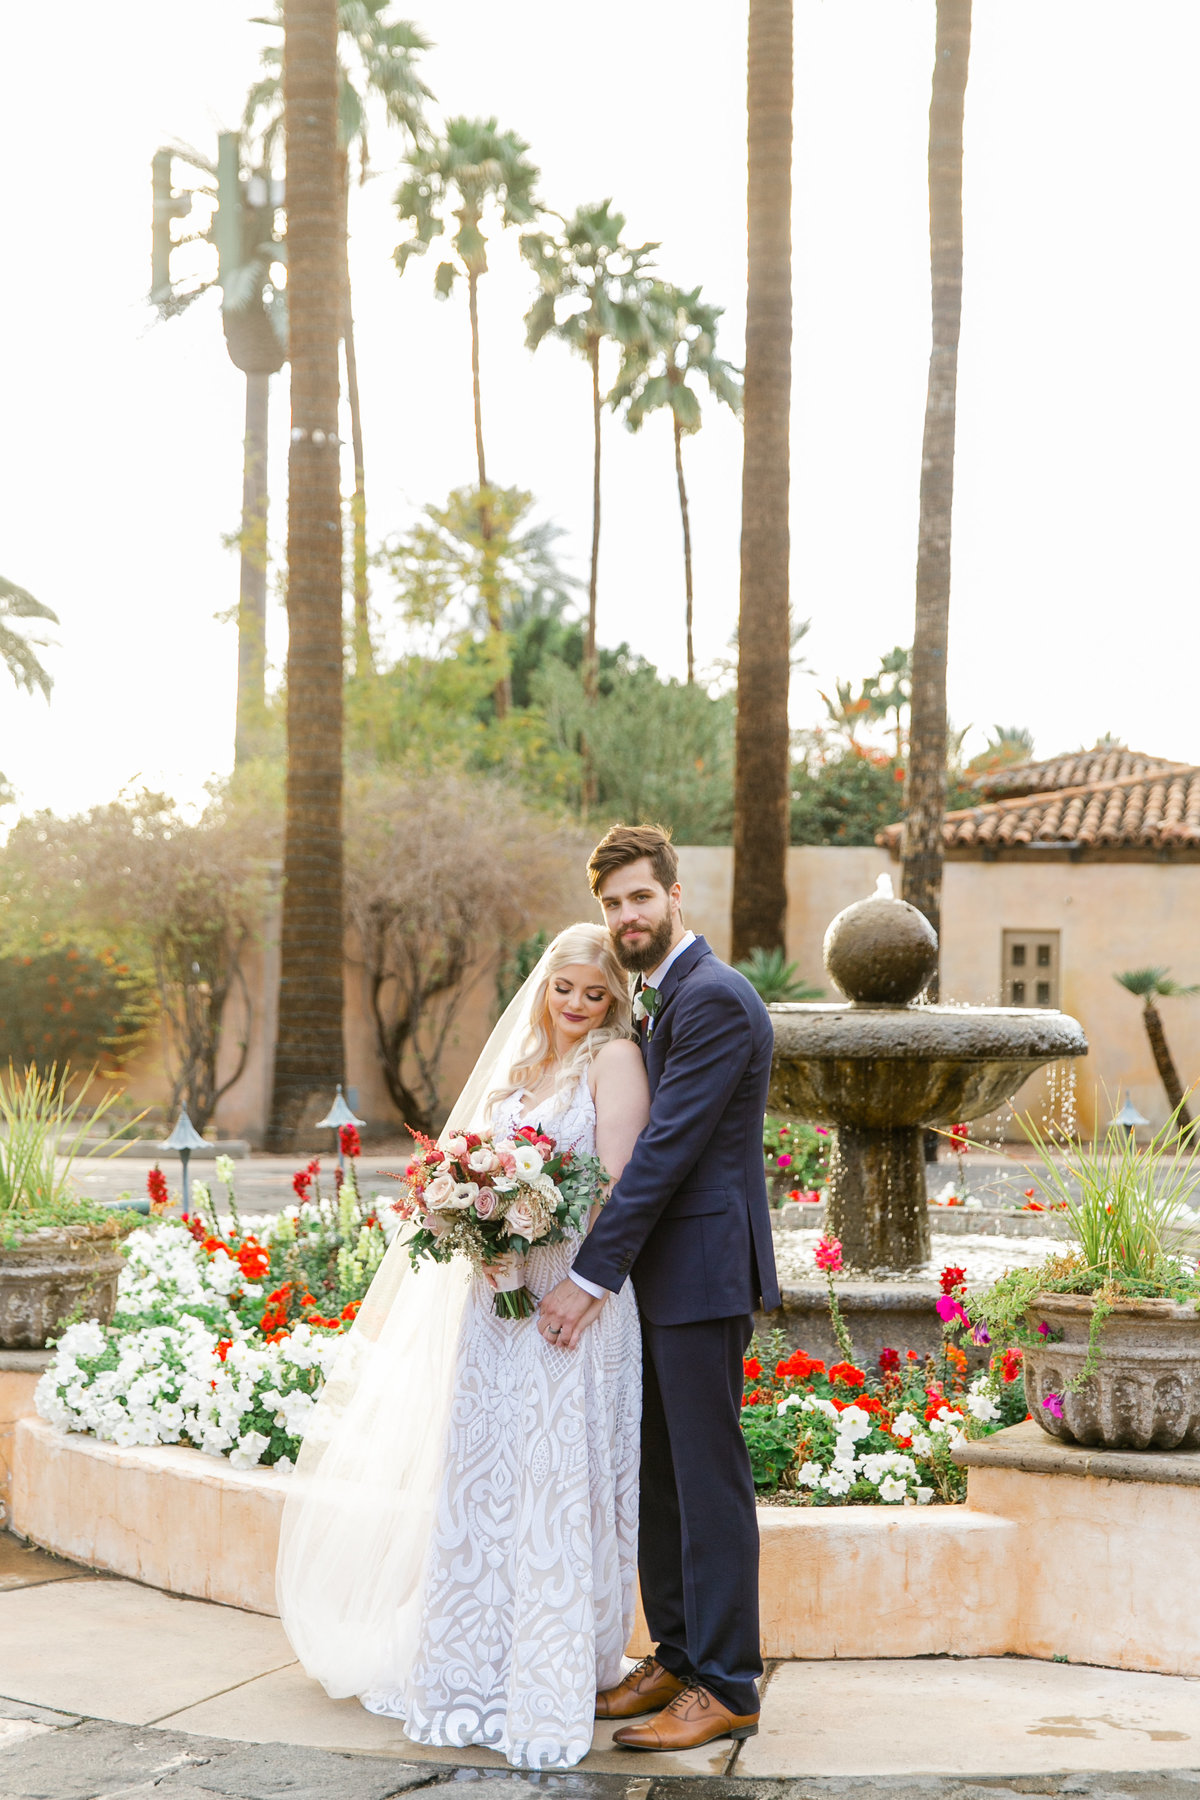 Karlie Colleen Photography - The Royal Palms Wedding - Some Like It Classic - Alex & Sam-540